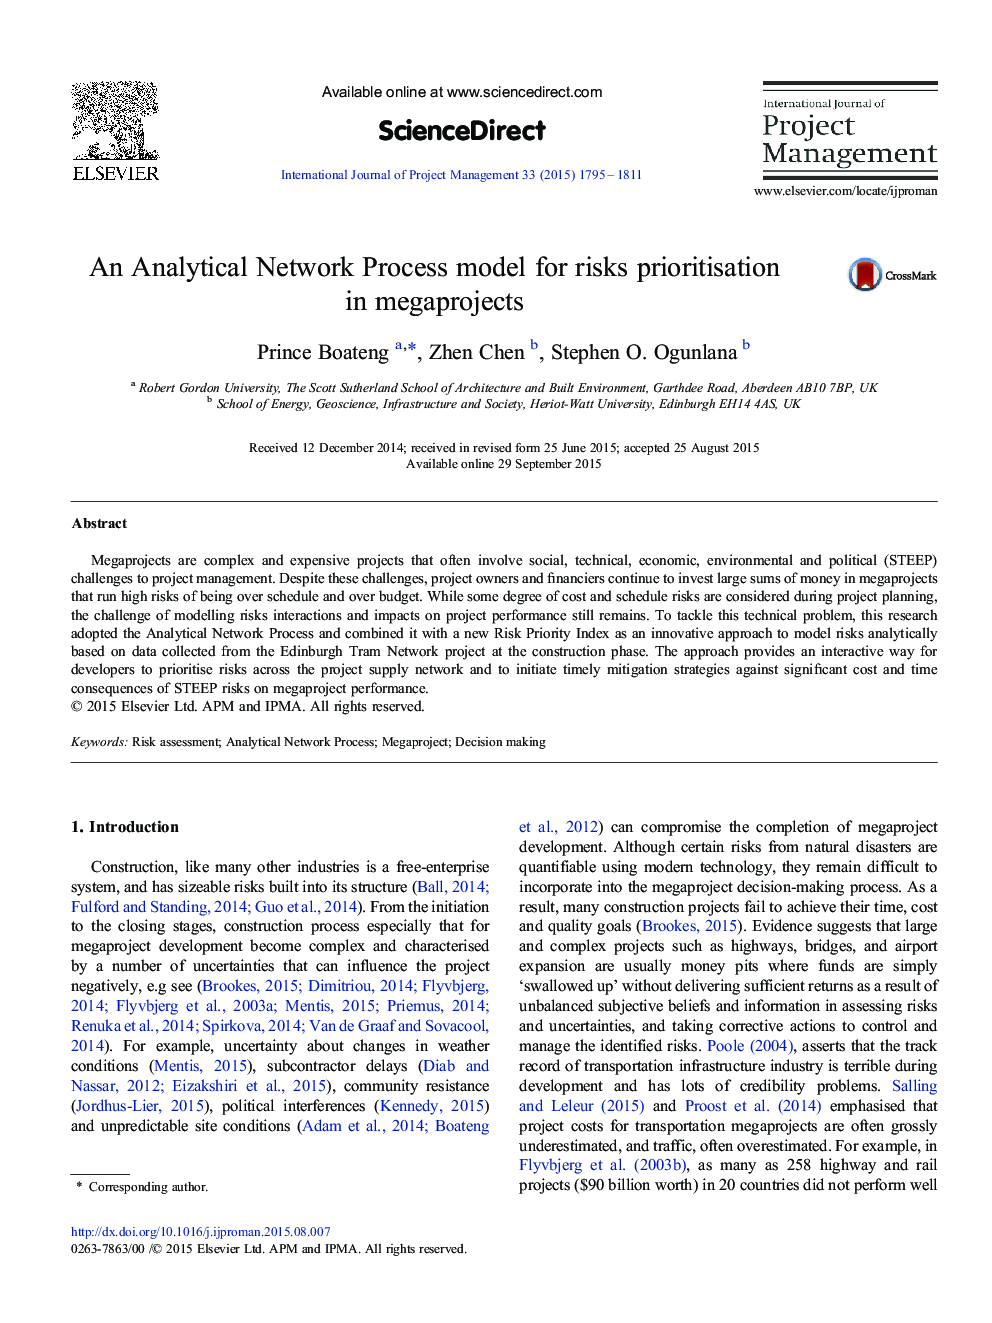 An Analytical Network Process model for risks prioritisation in megaprojects